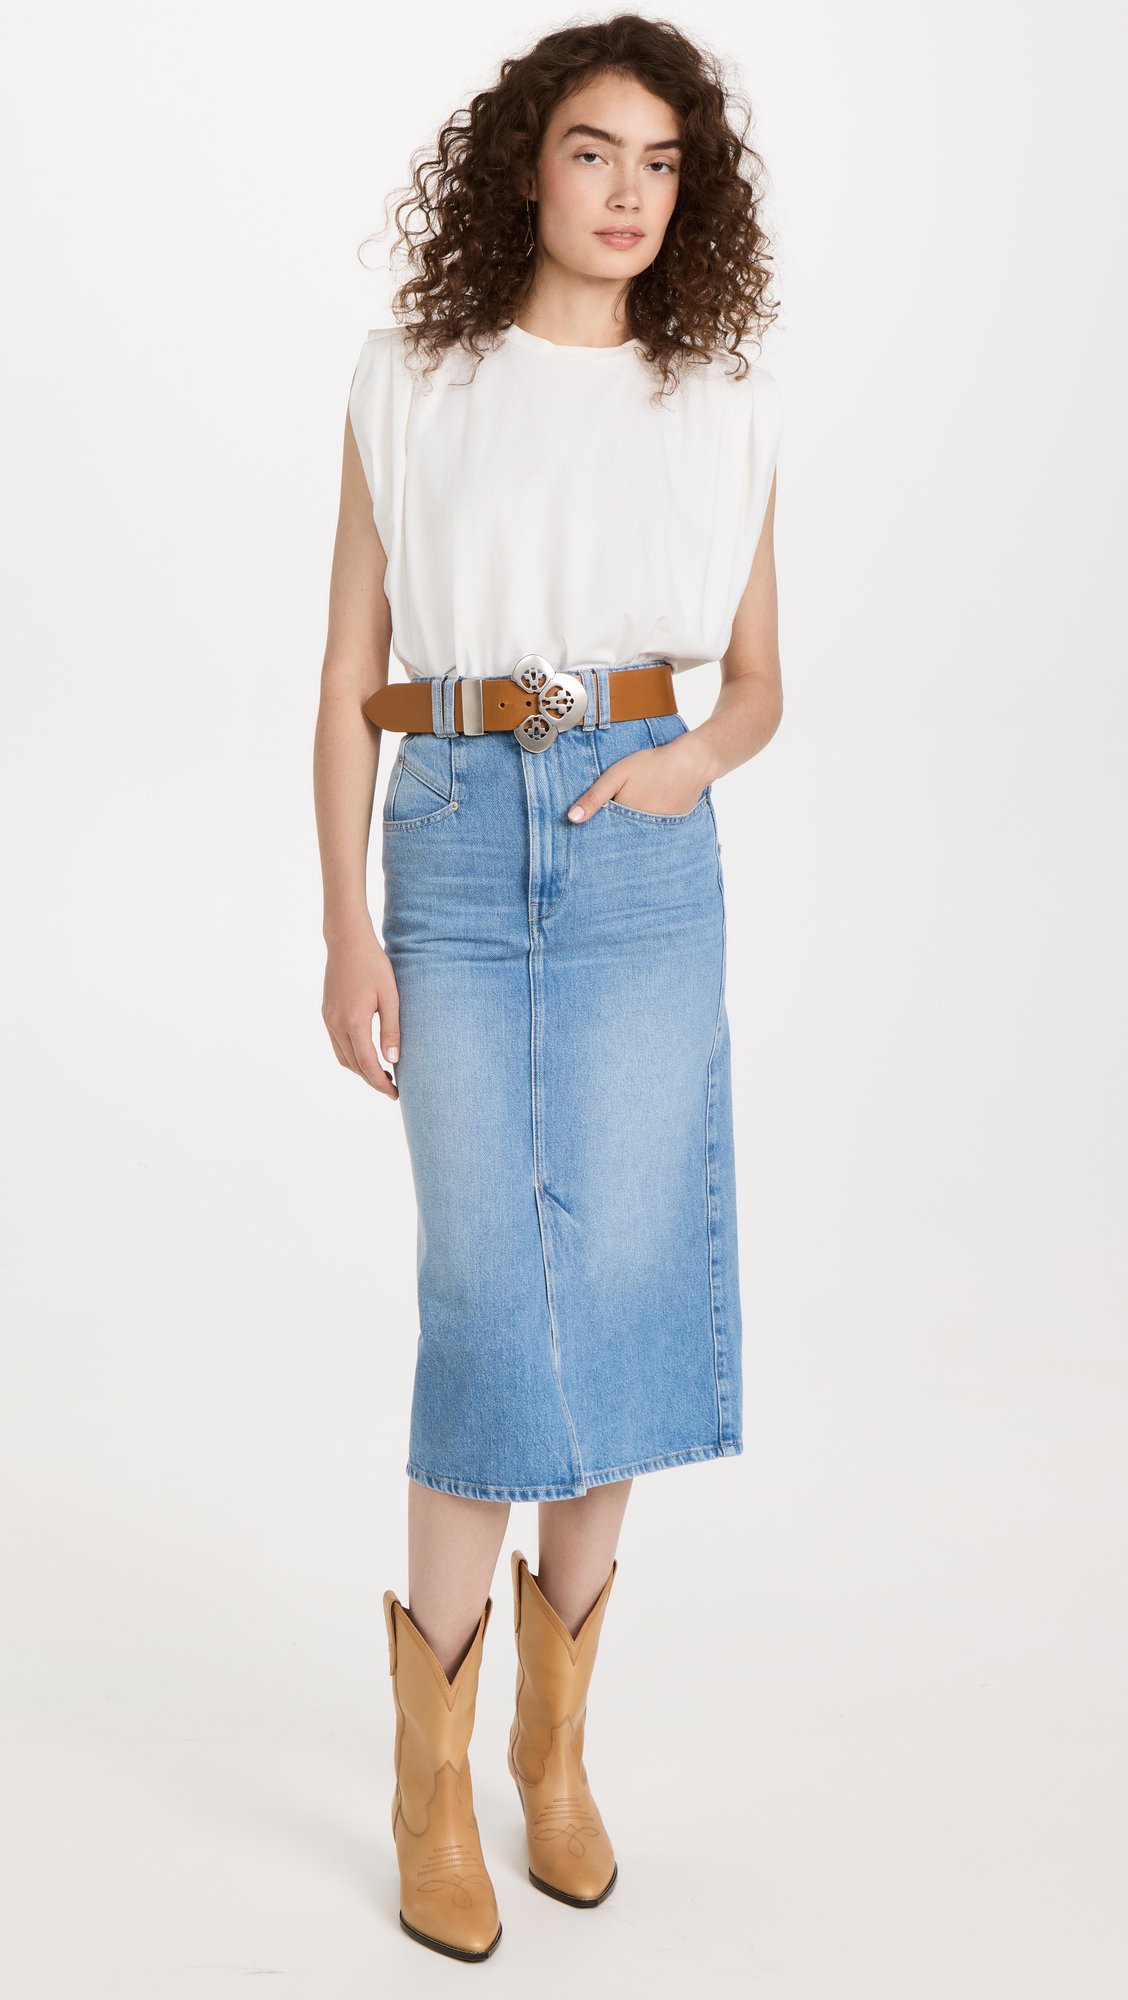 The 30 Best Denim Skirts That Are Making a Fashion Comeback | Who What Wear